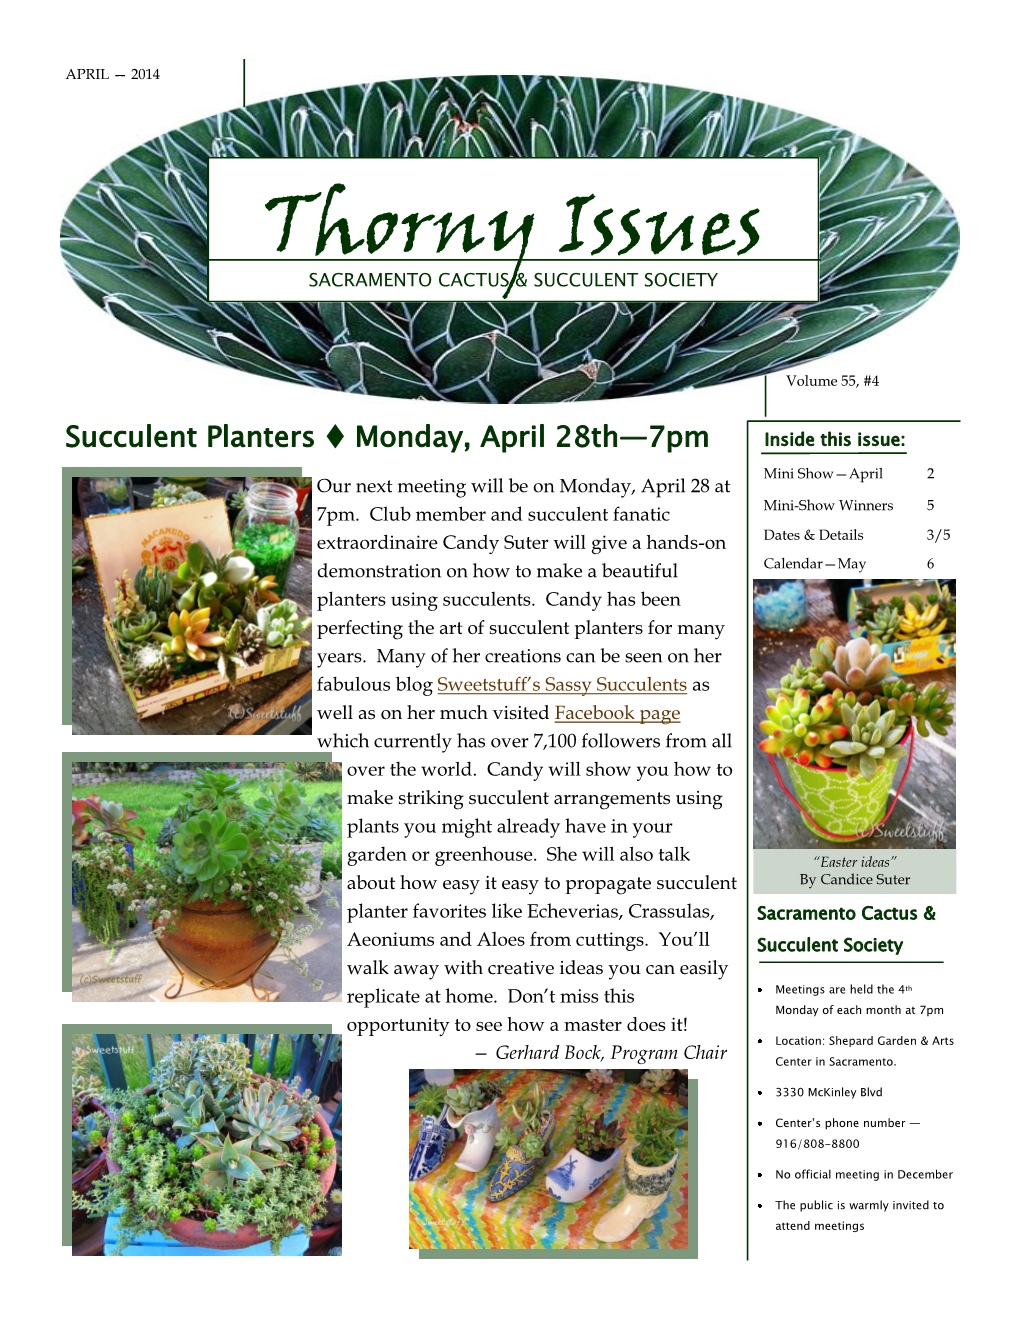 Thorny Issues DATES & DETAILS —